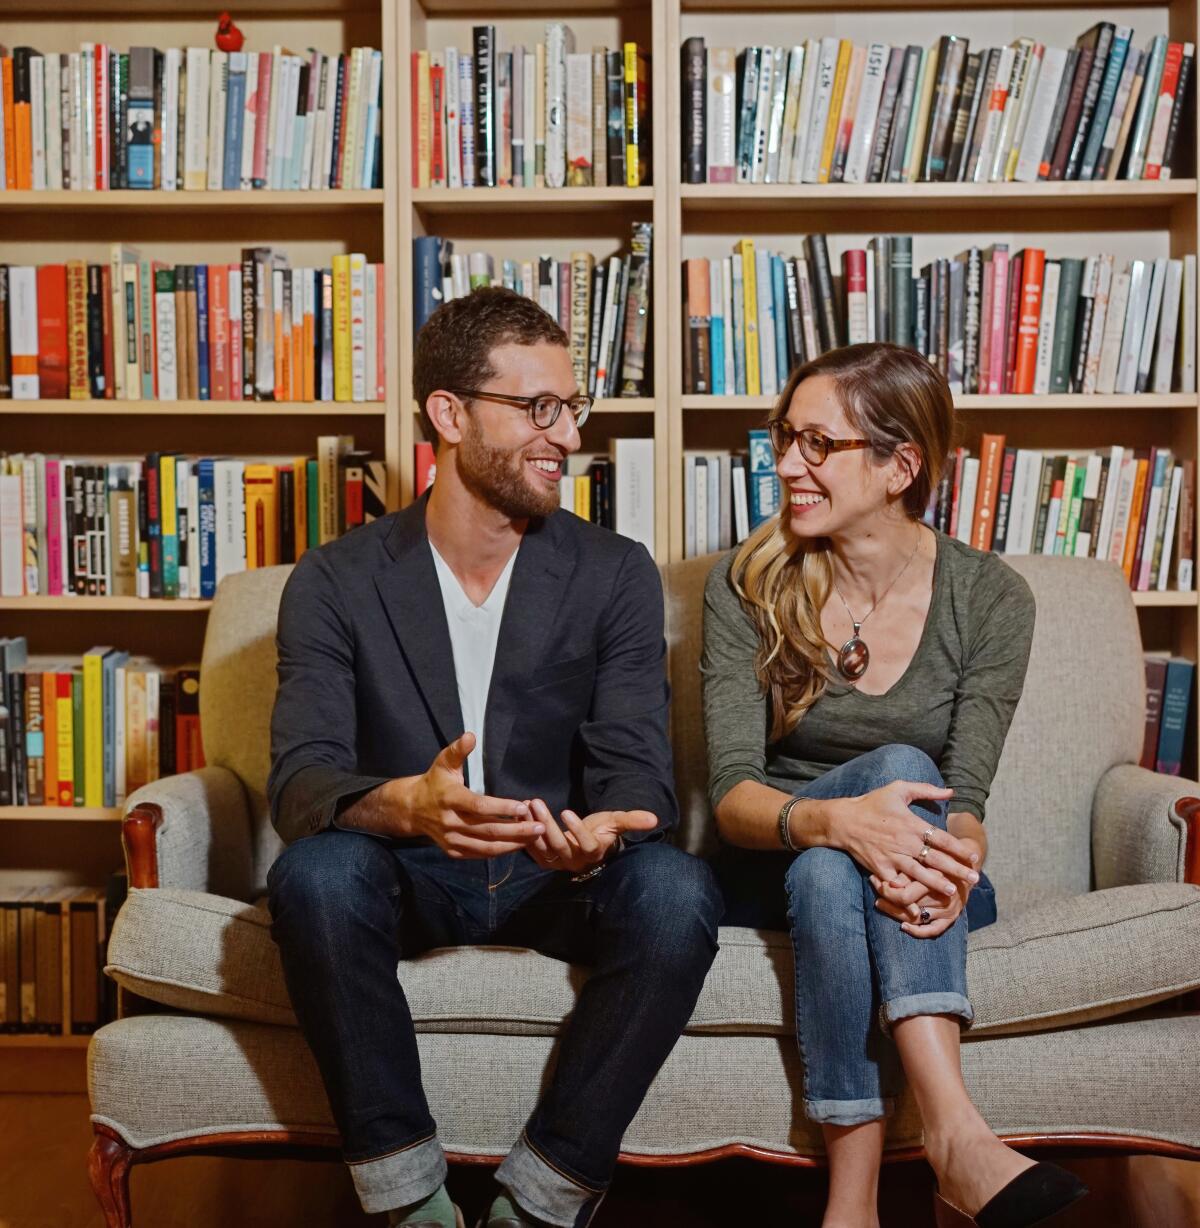 A man with a trimmed beard and a woman with long blond hair look at each other against a backdrop of bookshelves.